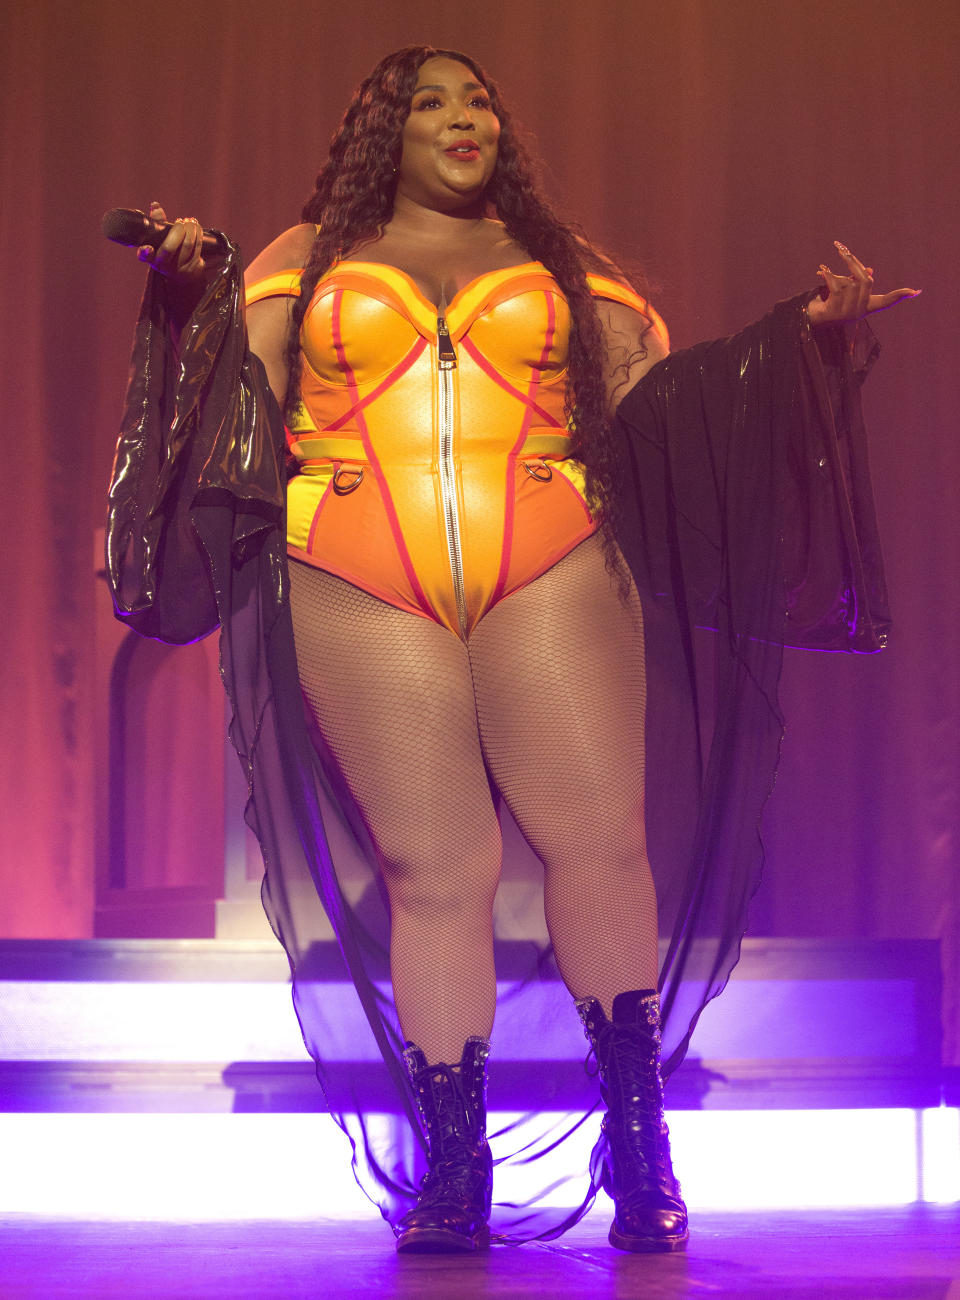 FILE - This Sept. 18, 2019 file photo shows Lizzo performing at The Met in Philadelphia. Mina Lioness’ longstanding battle to finally receive writing credit on Lizzo’s megahit song “Truth Hurts” is paying off in more ways than one: it could win her a potential Grammy Award. Lizzo's breakthrough tune features signature line that originated from a 2017 tweet by Lioness. (Photo by Owen Sweeney/Invision/AP, File)